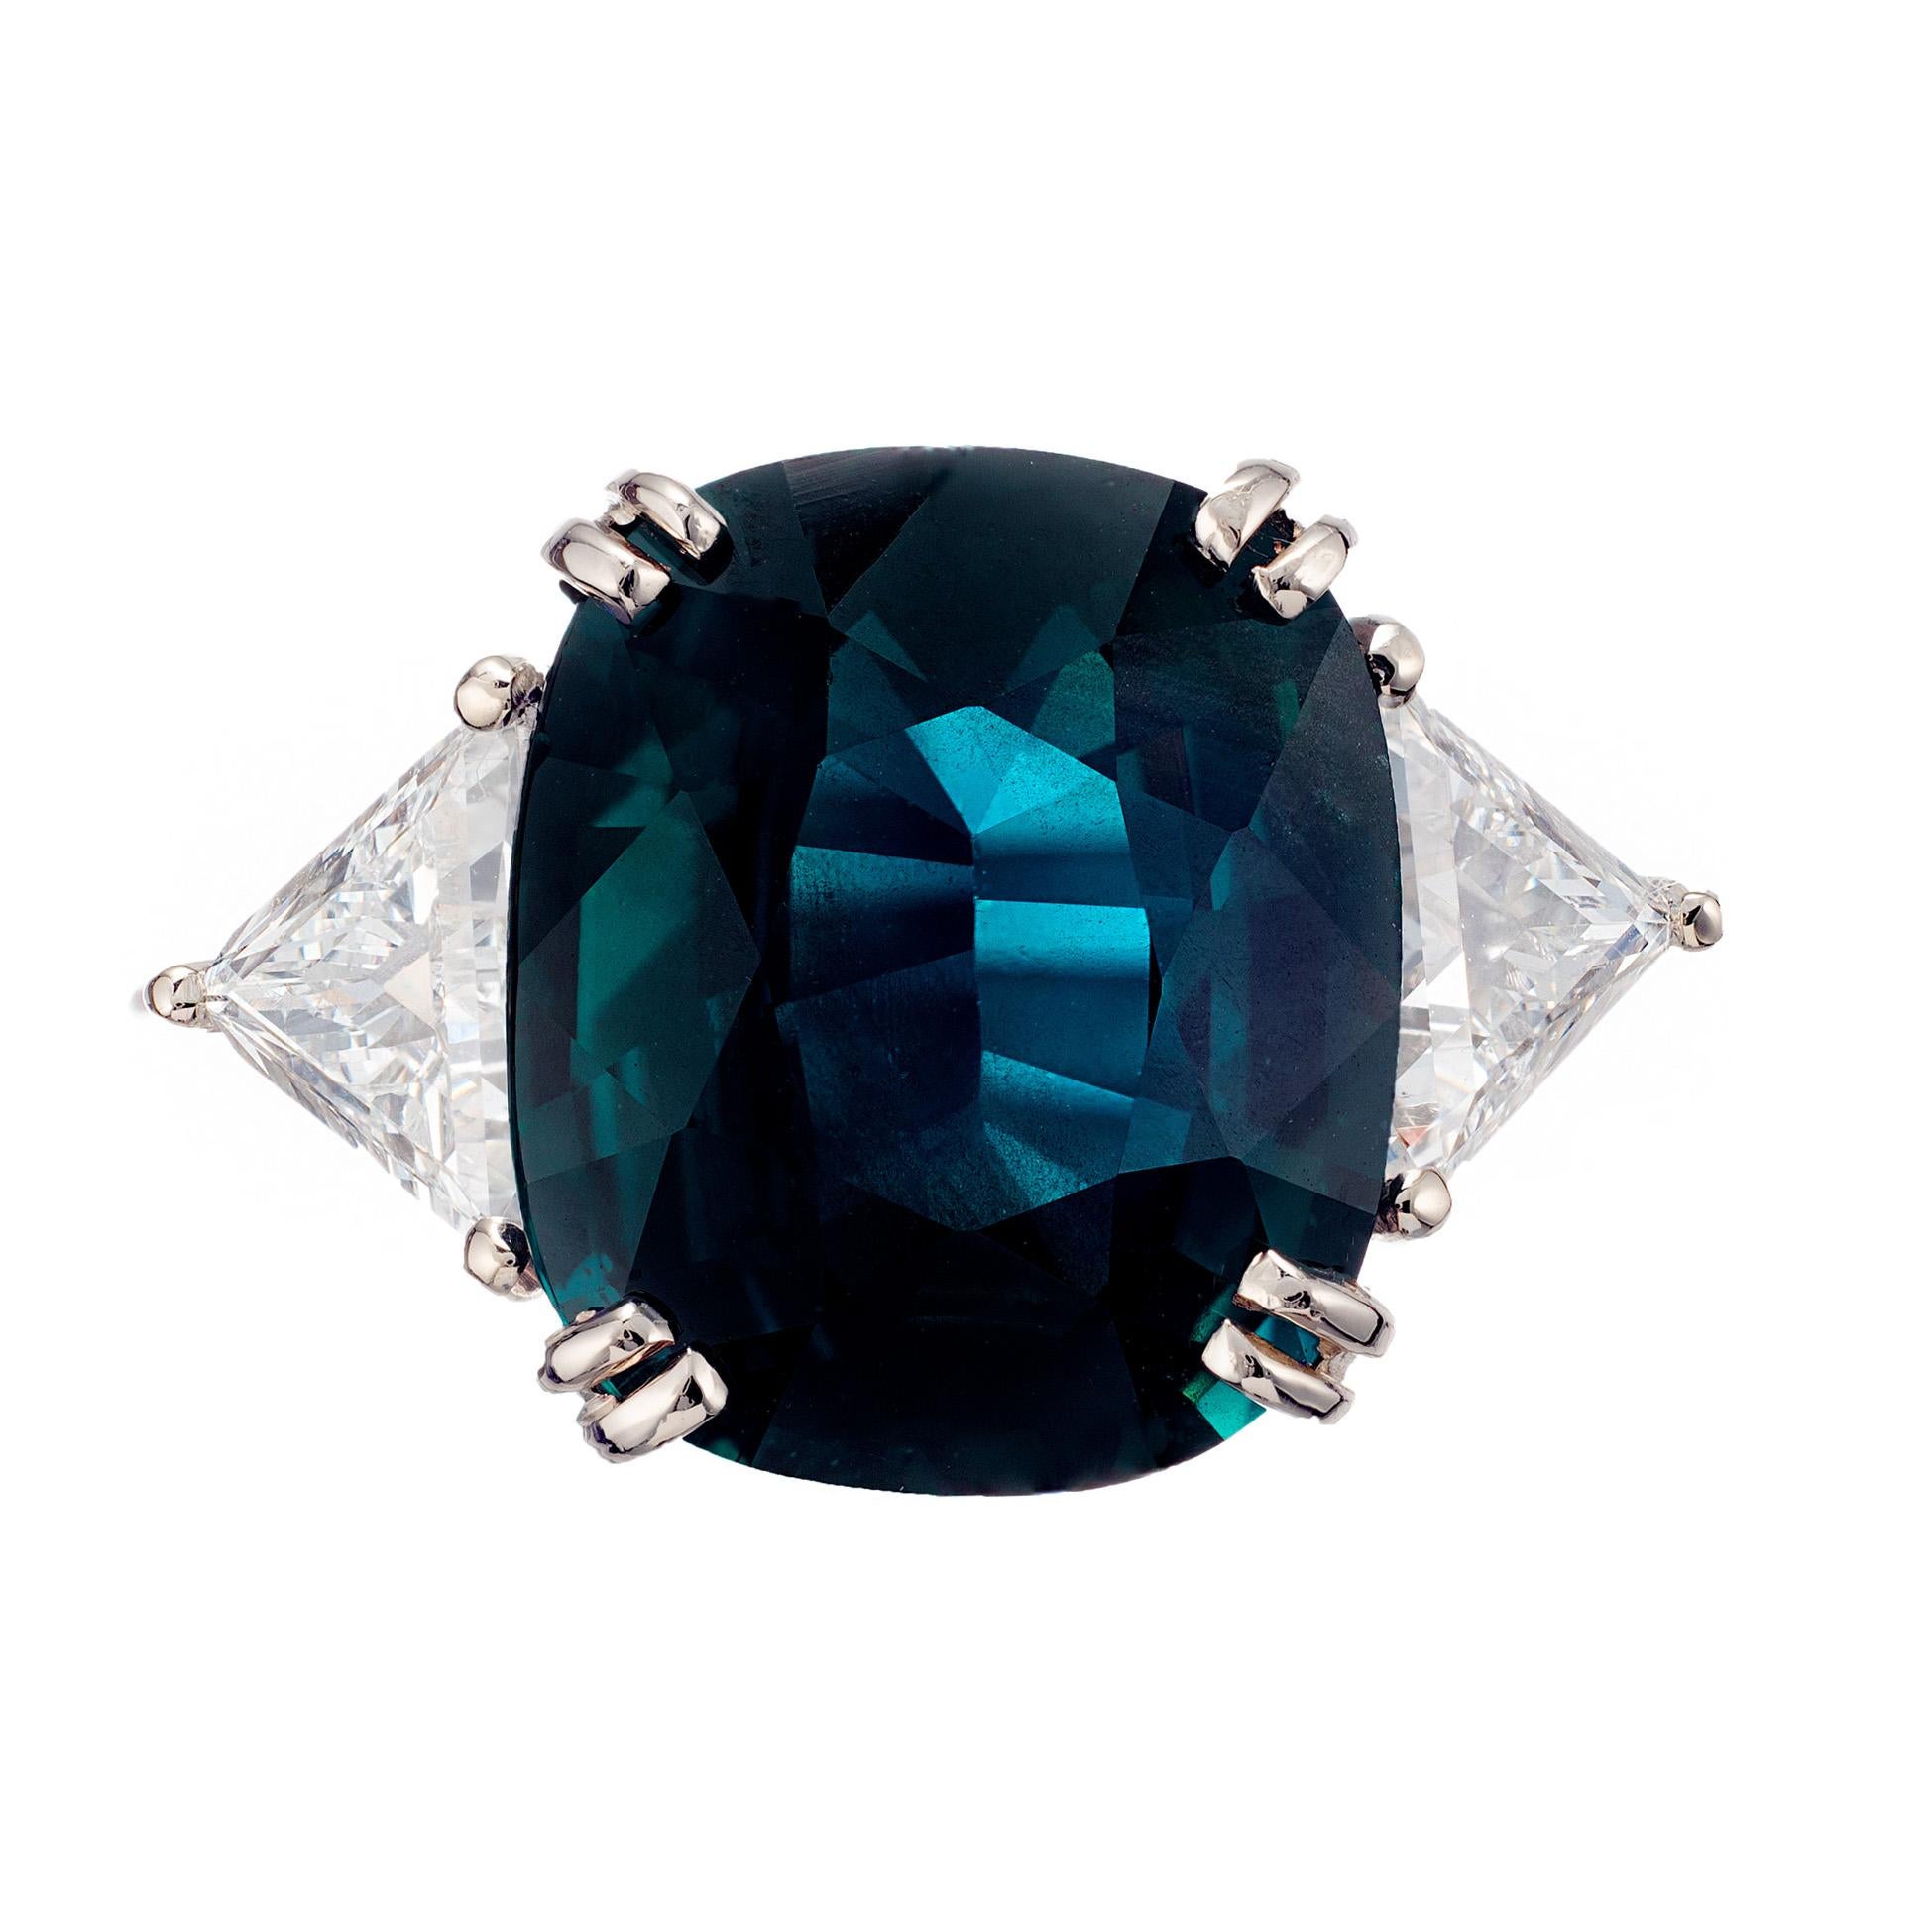 Teal green blue natural sapphire and diamond three-stone engagement ring. The sapphire is from a 1930's estate. Gia certified as no heat no enhancements. Platinum setting with tow trilliant cut side diamonds. Classic engagement ring from the Peter